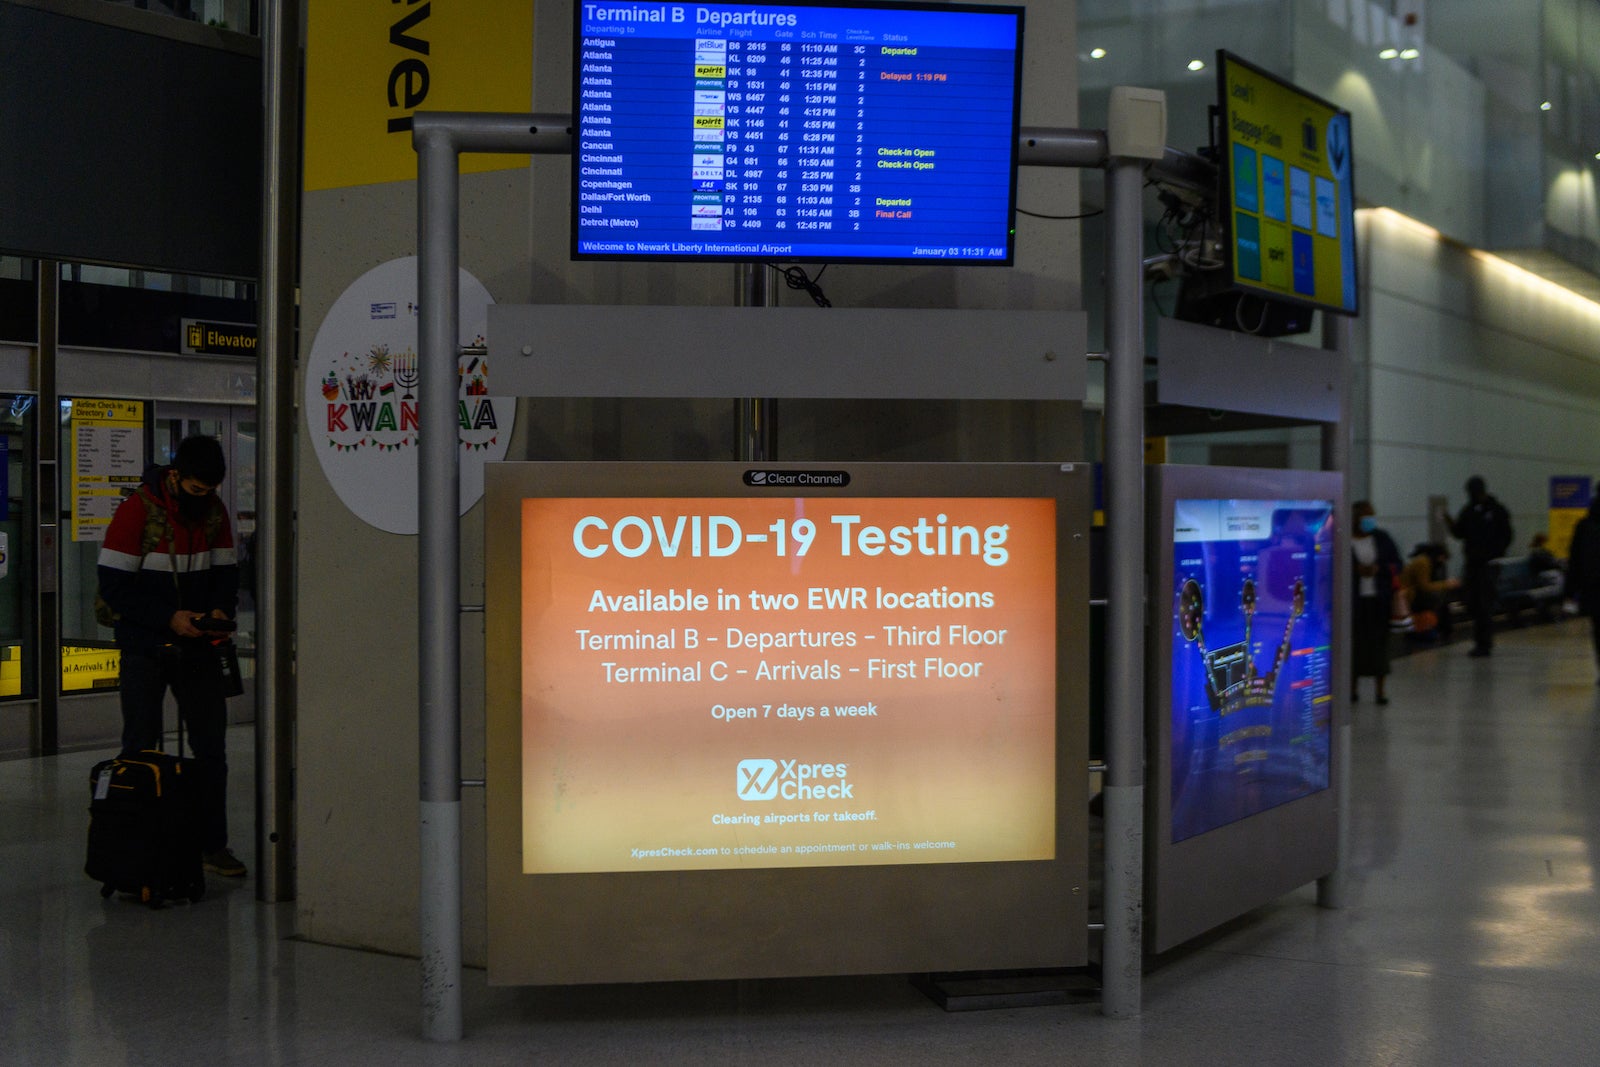 COVID testing airport notification